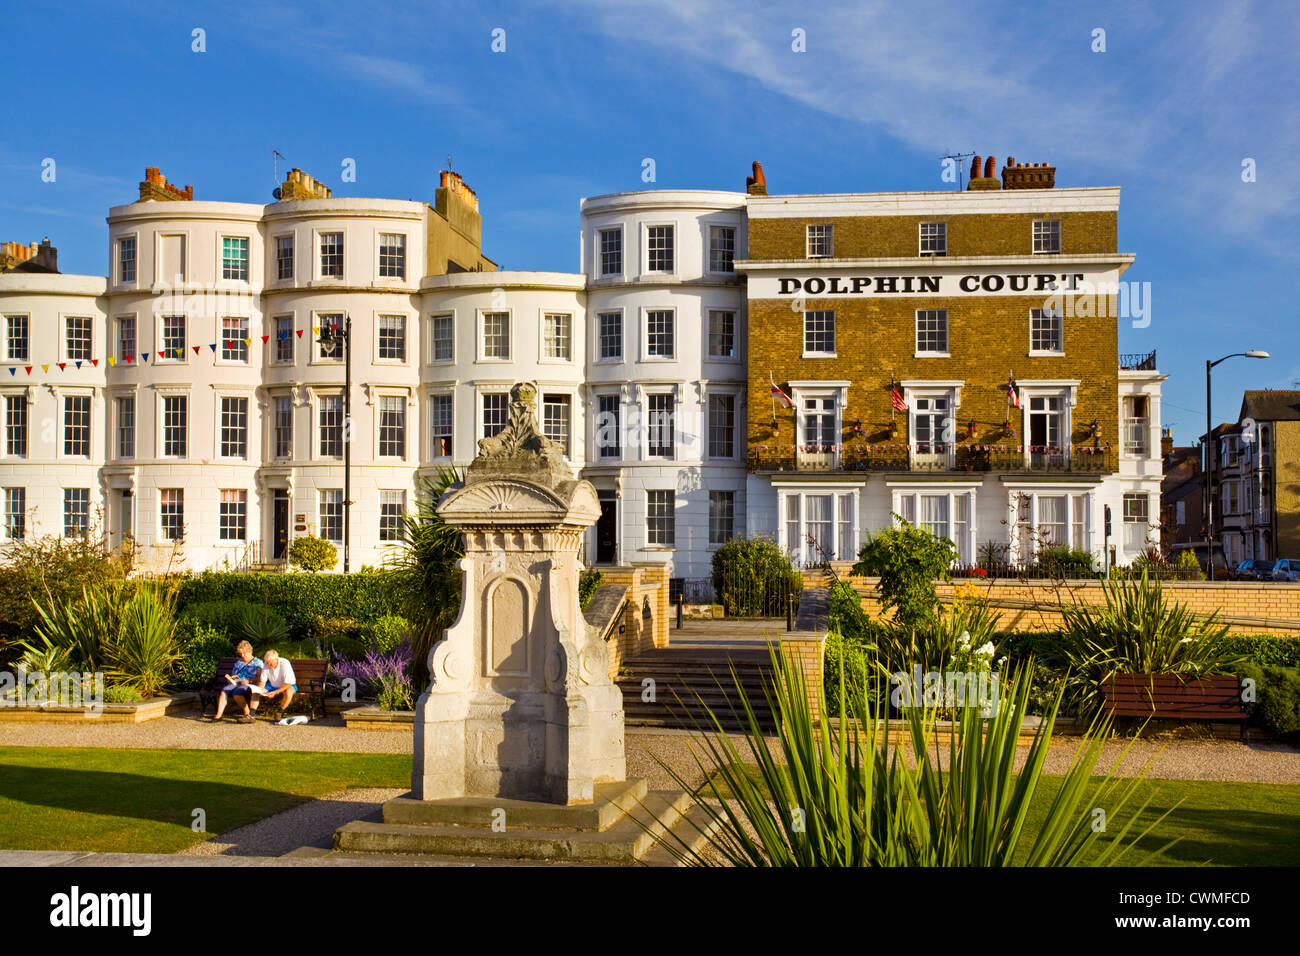 Dolphin Court holiday appartments Herne Bay Kent UK Stock Photo